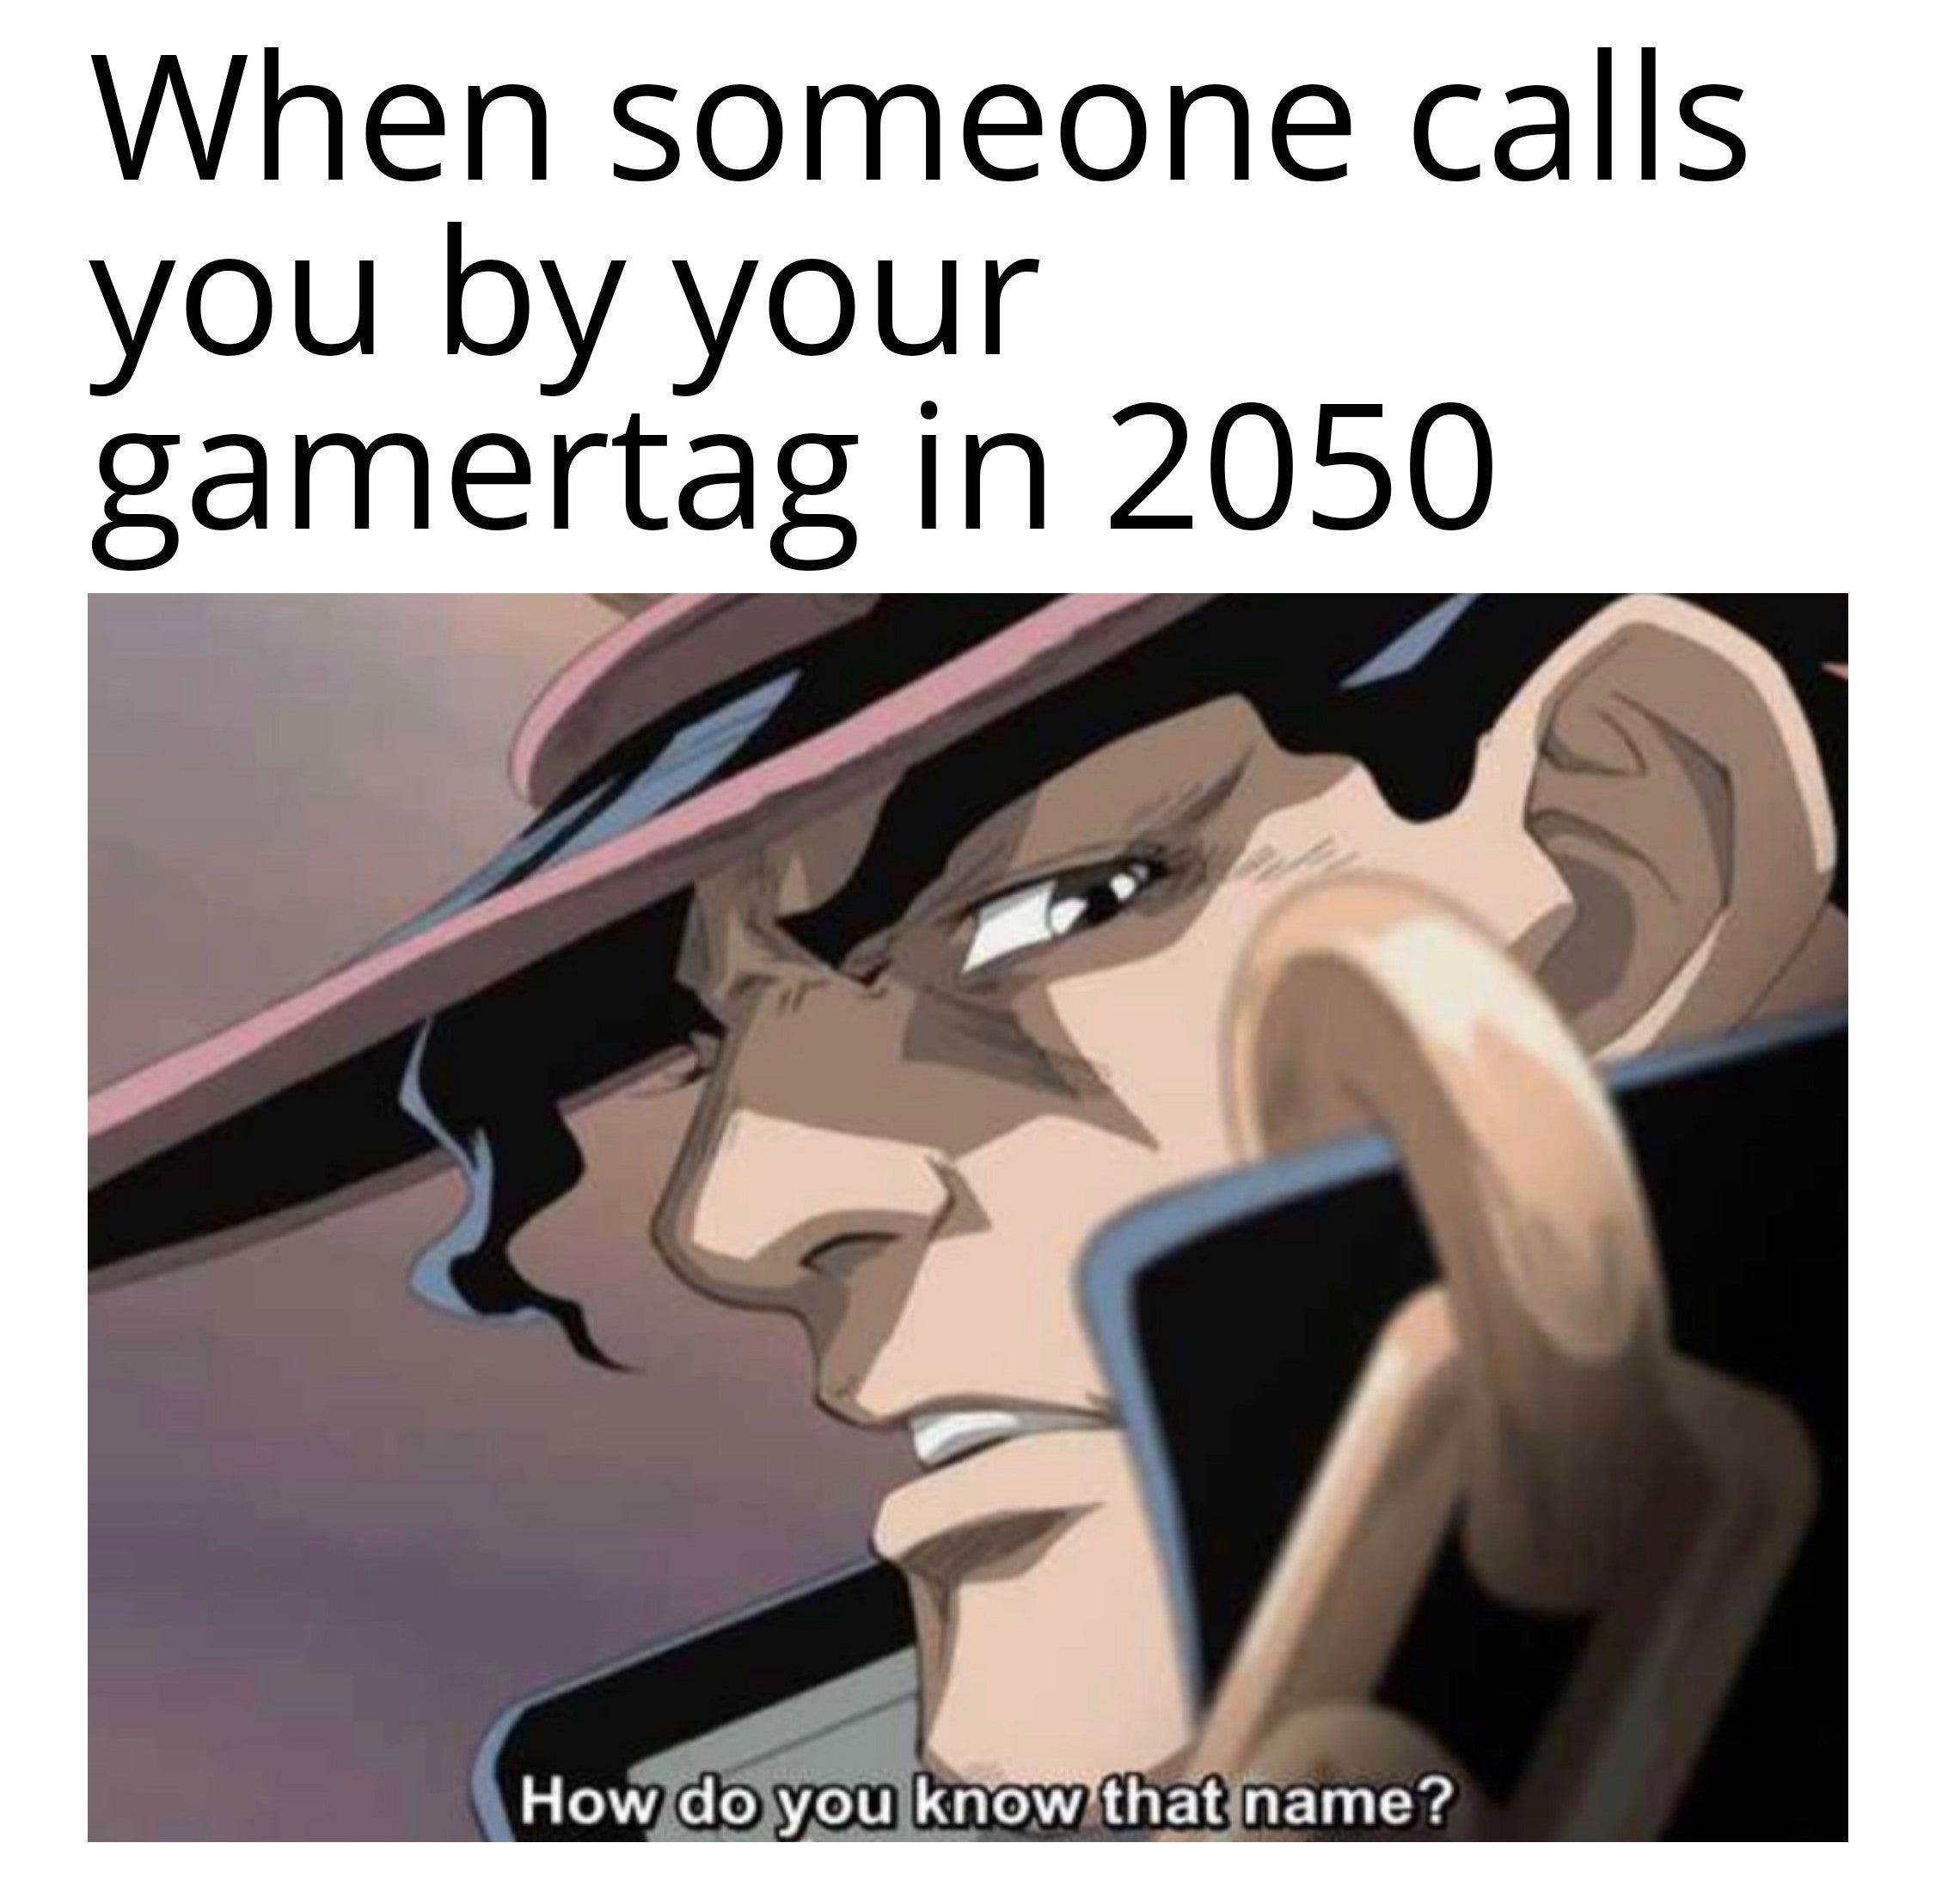 yare yare daze meme - When someone calls you by your gamertag in 2050 How do you know that name?